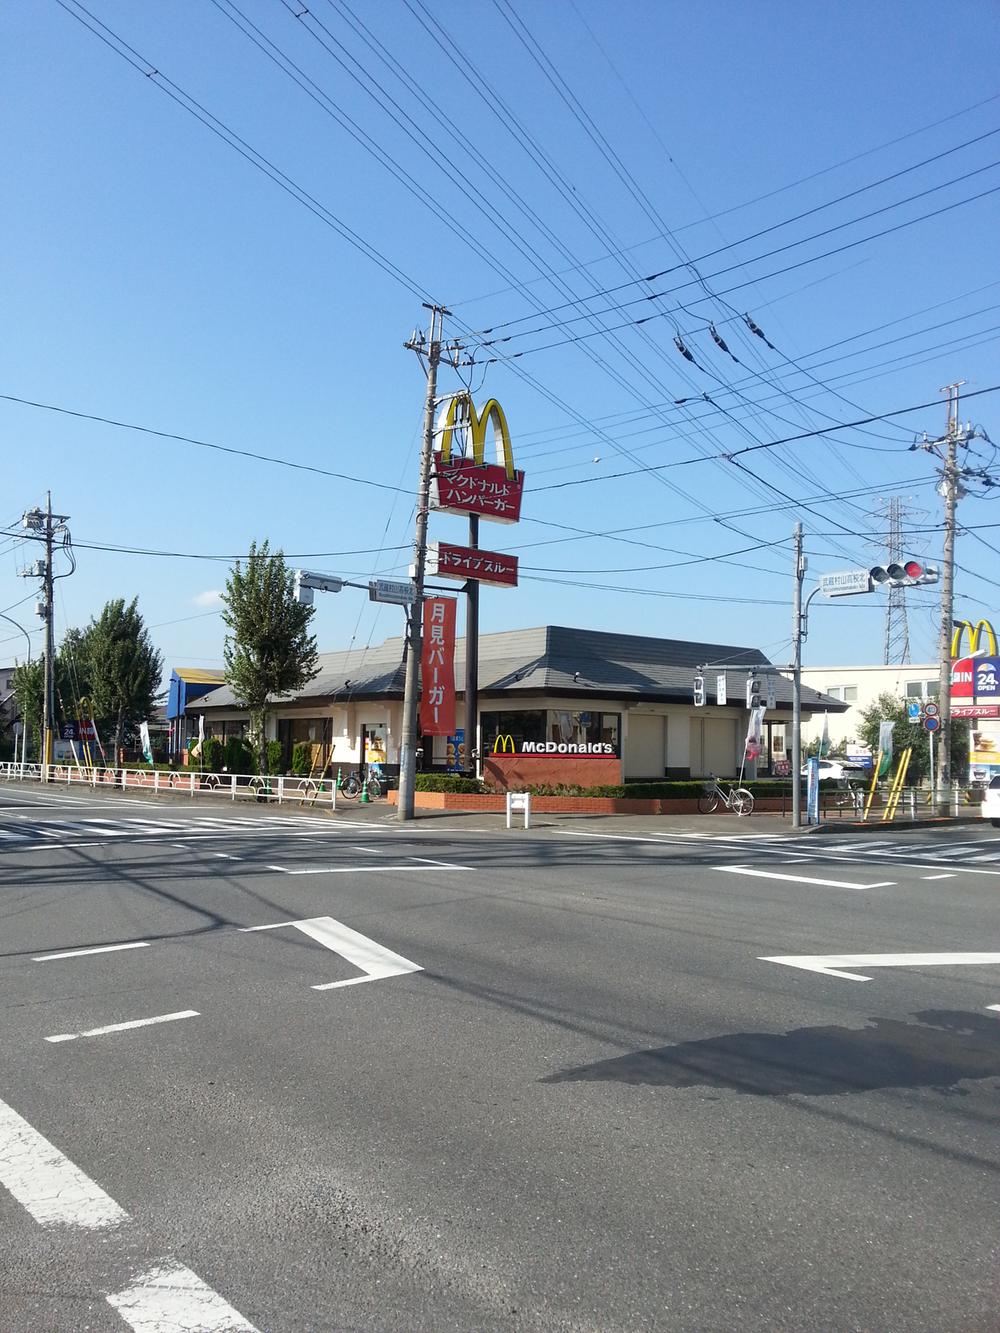 Other Environmental Photo. McDonald's 400m cafe instead to McDonald's new Ome Musashi Murayama shop, A 5-minute walk.